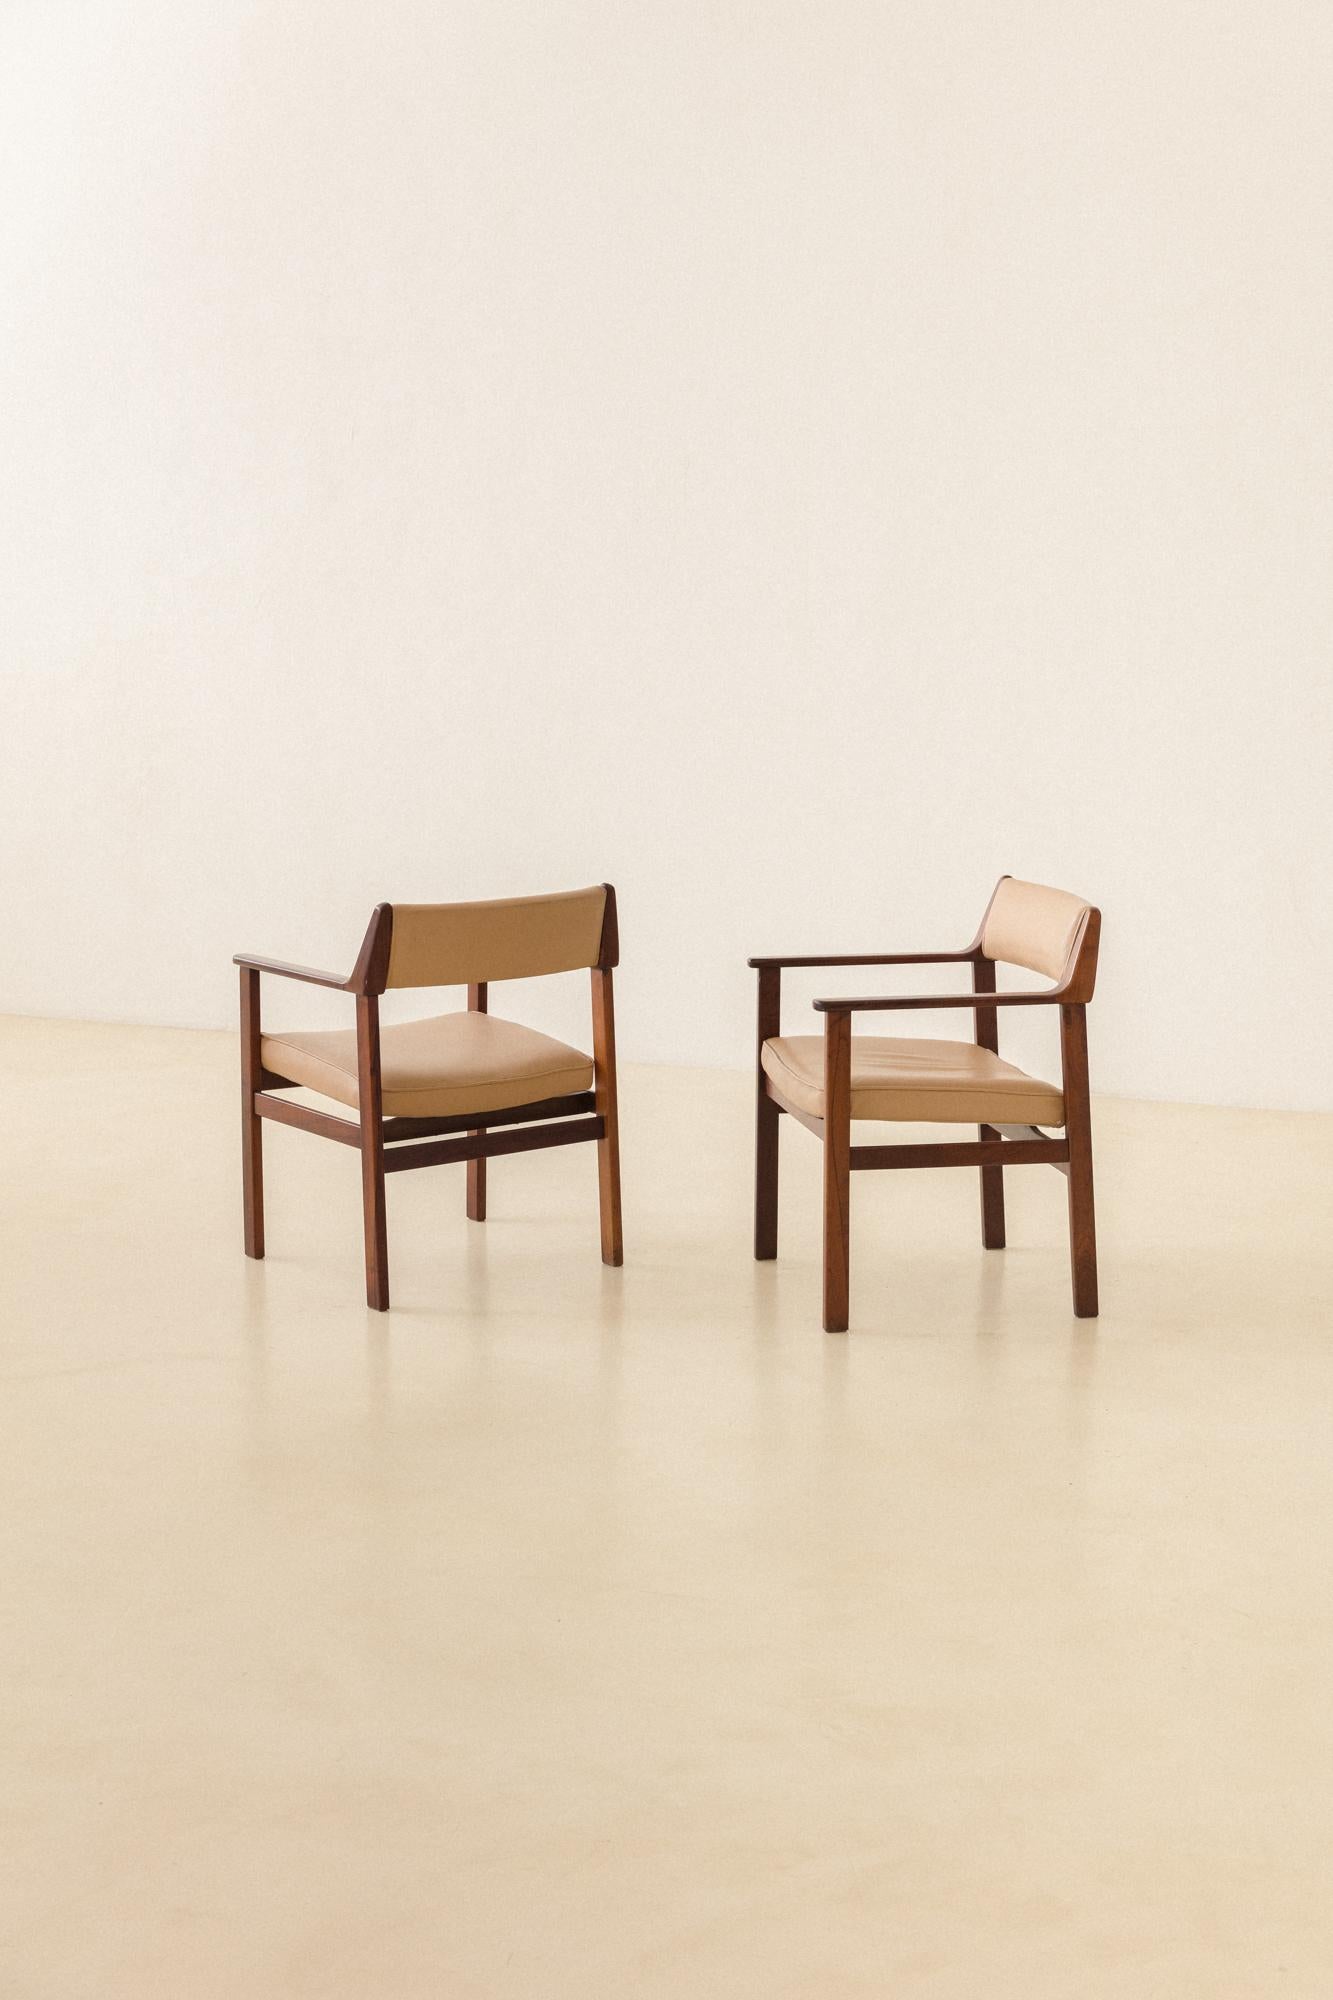 Mid-20th Century Pair of Solid Rosewood Chairs with Armrests by Brazilian Company Casulo, 1960s For Sale